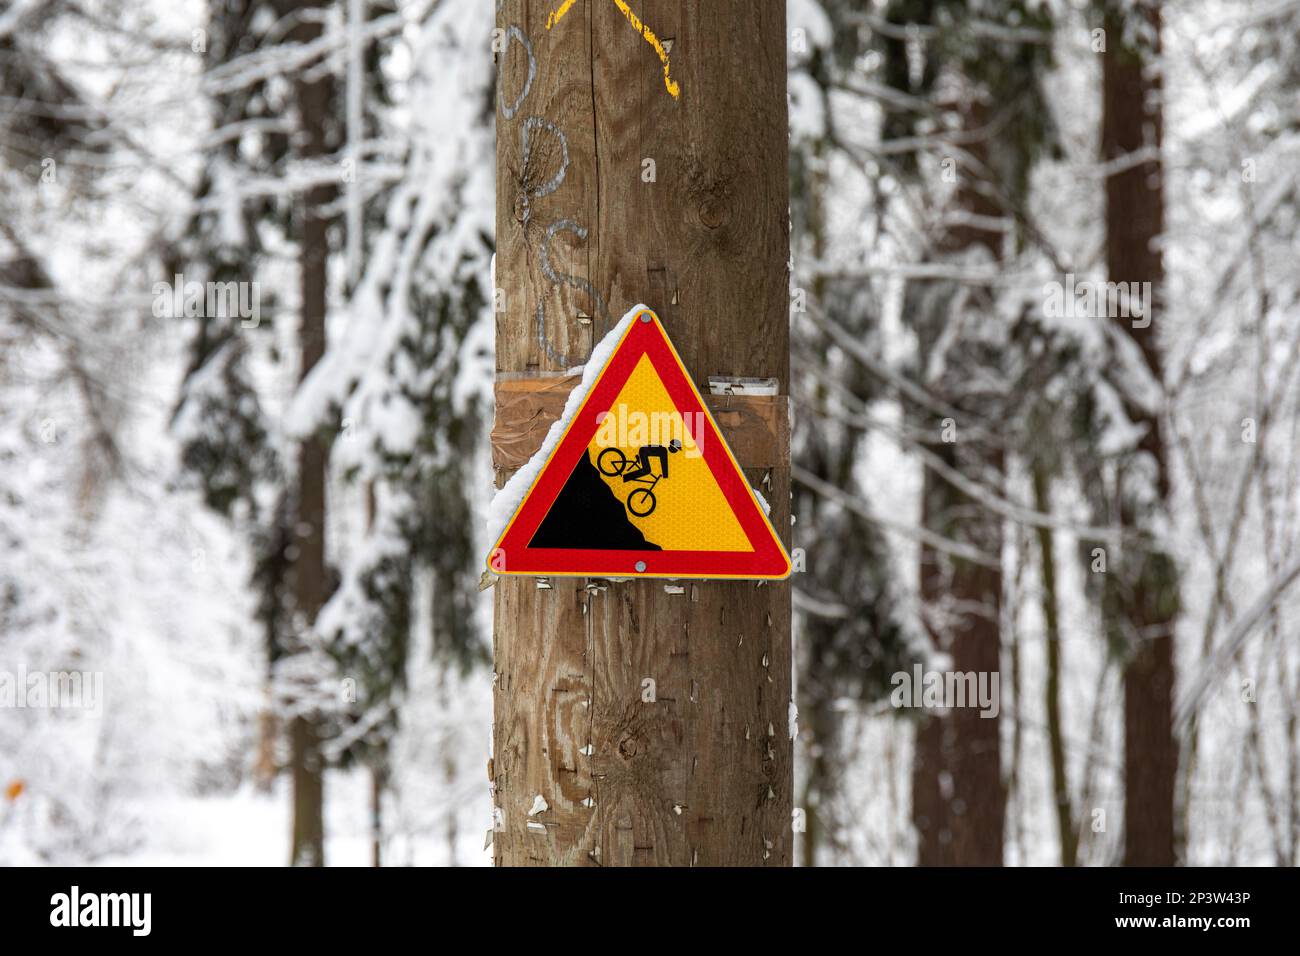 Steep slope warning sign for cyclists in Ruskeasuo, Helsinki, Finland Stock Photo